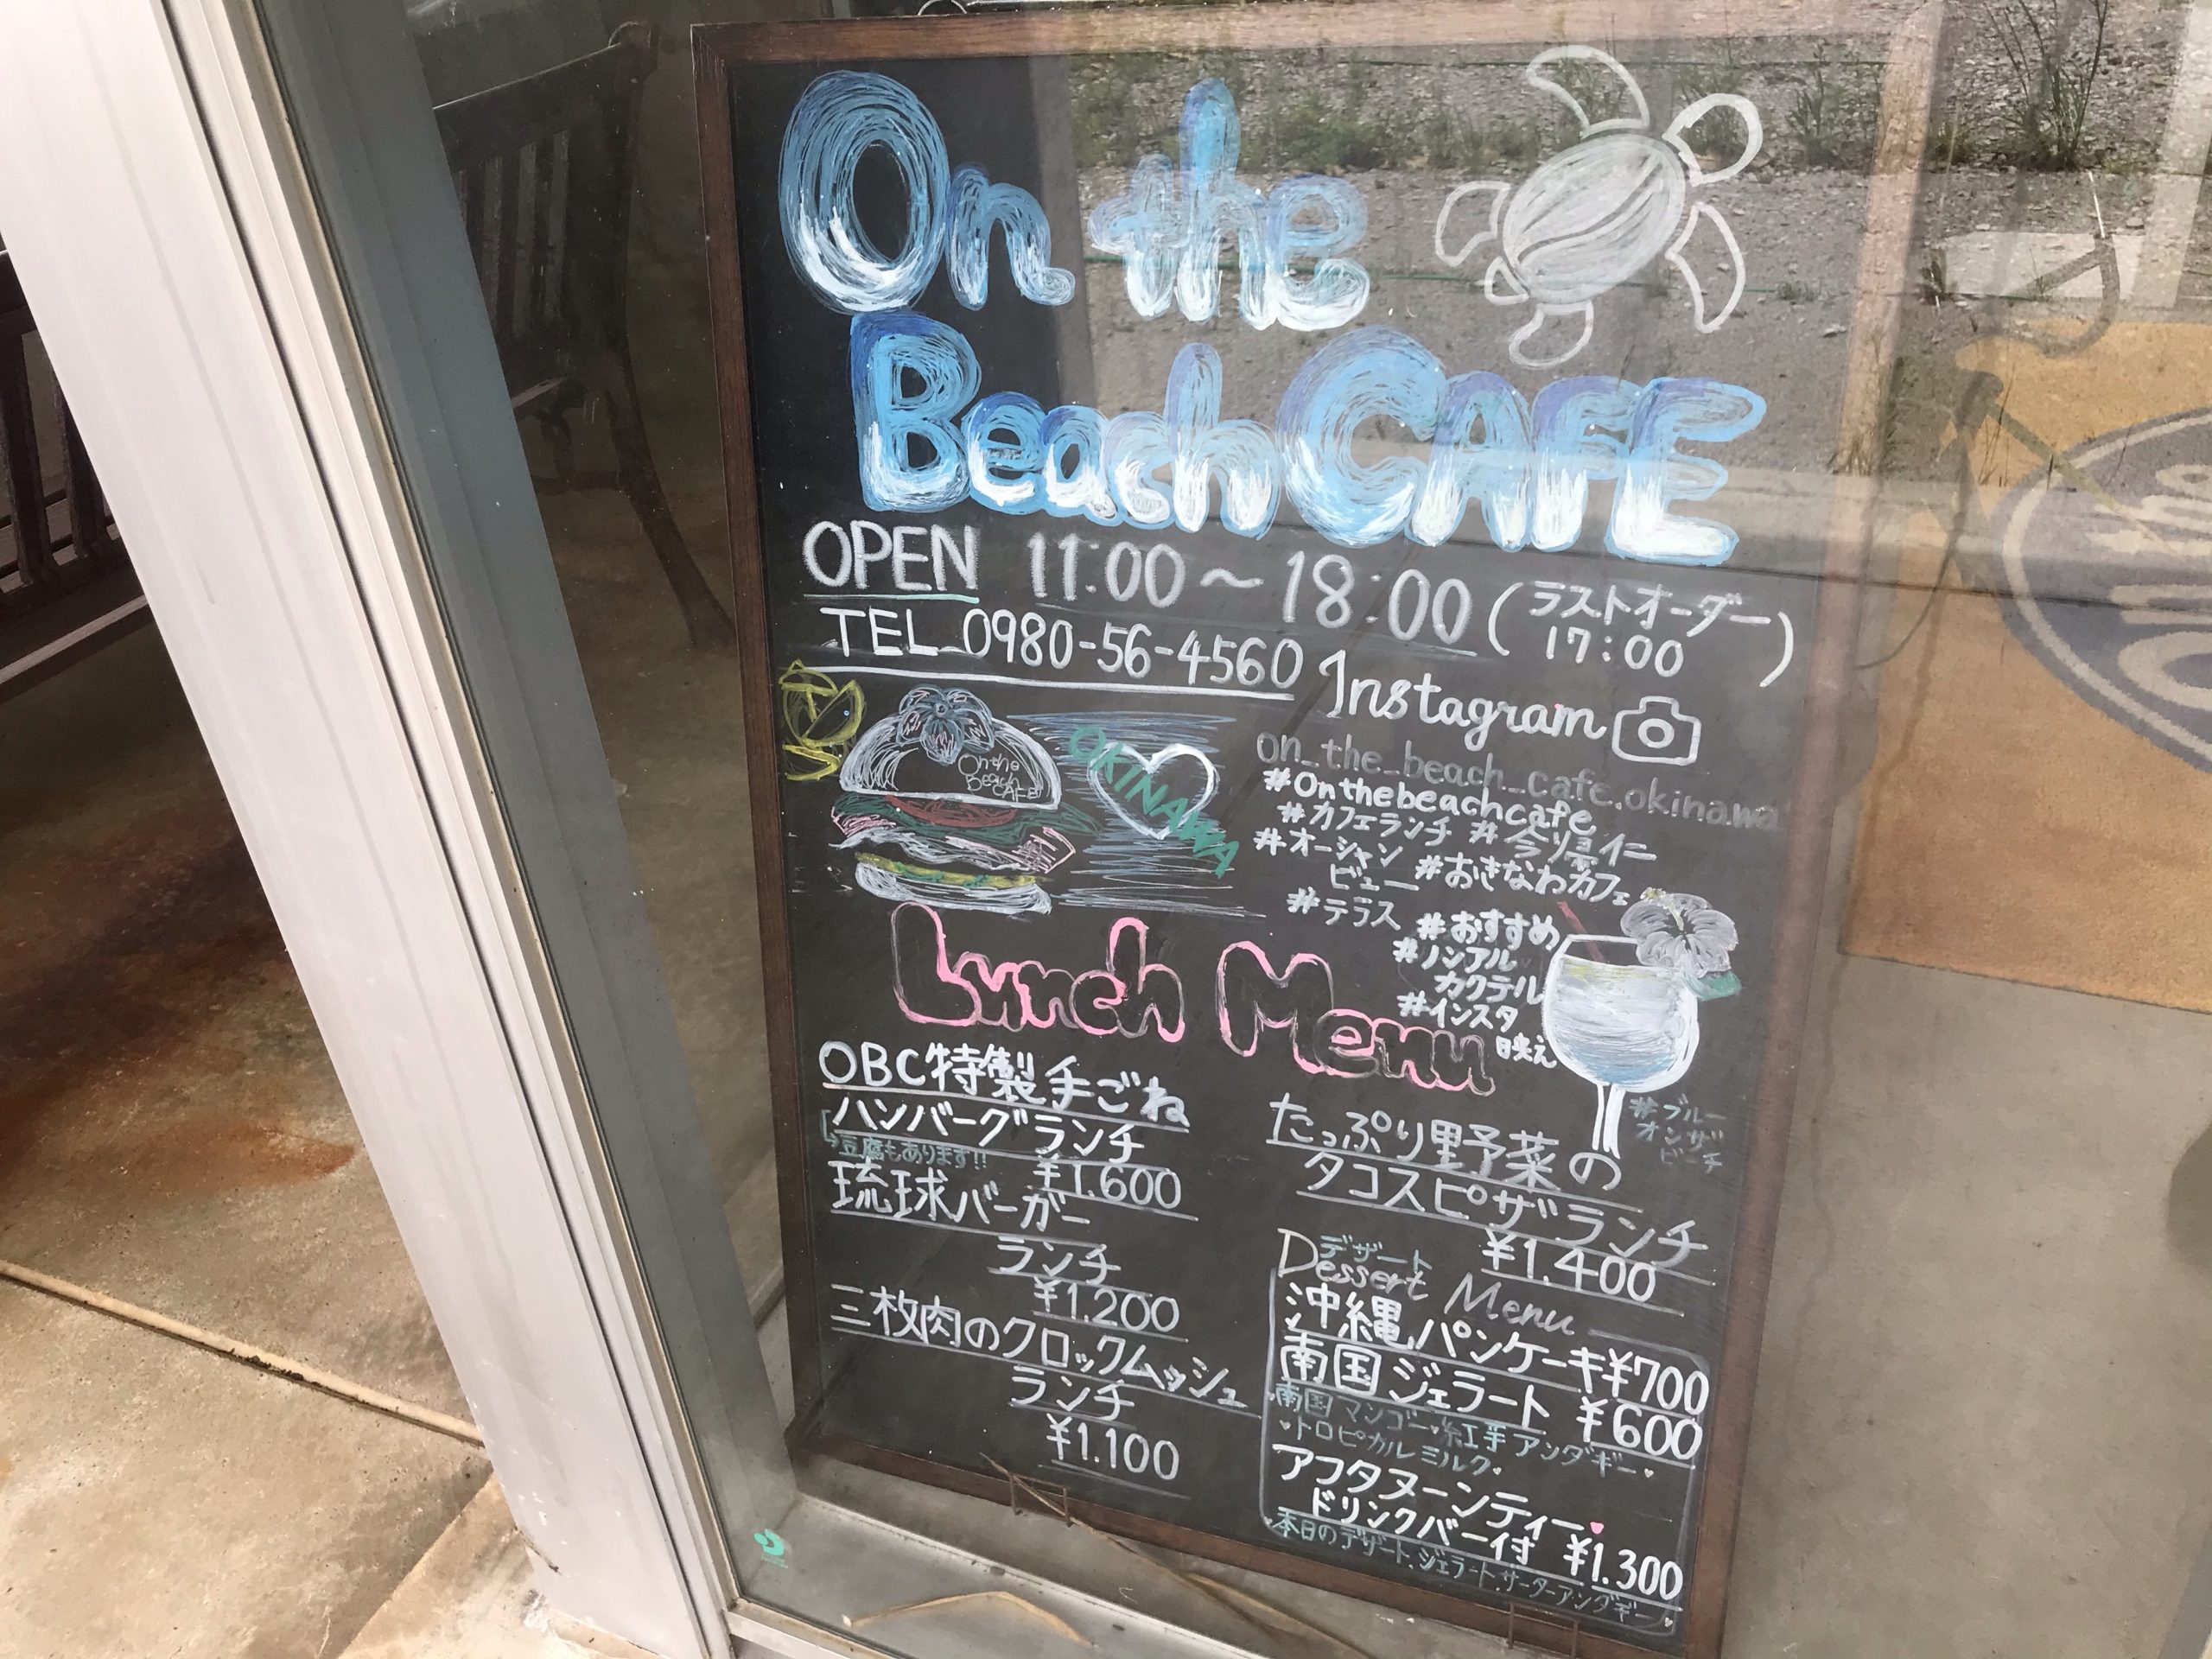 On the beach cafe 今帰仁村カフェ